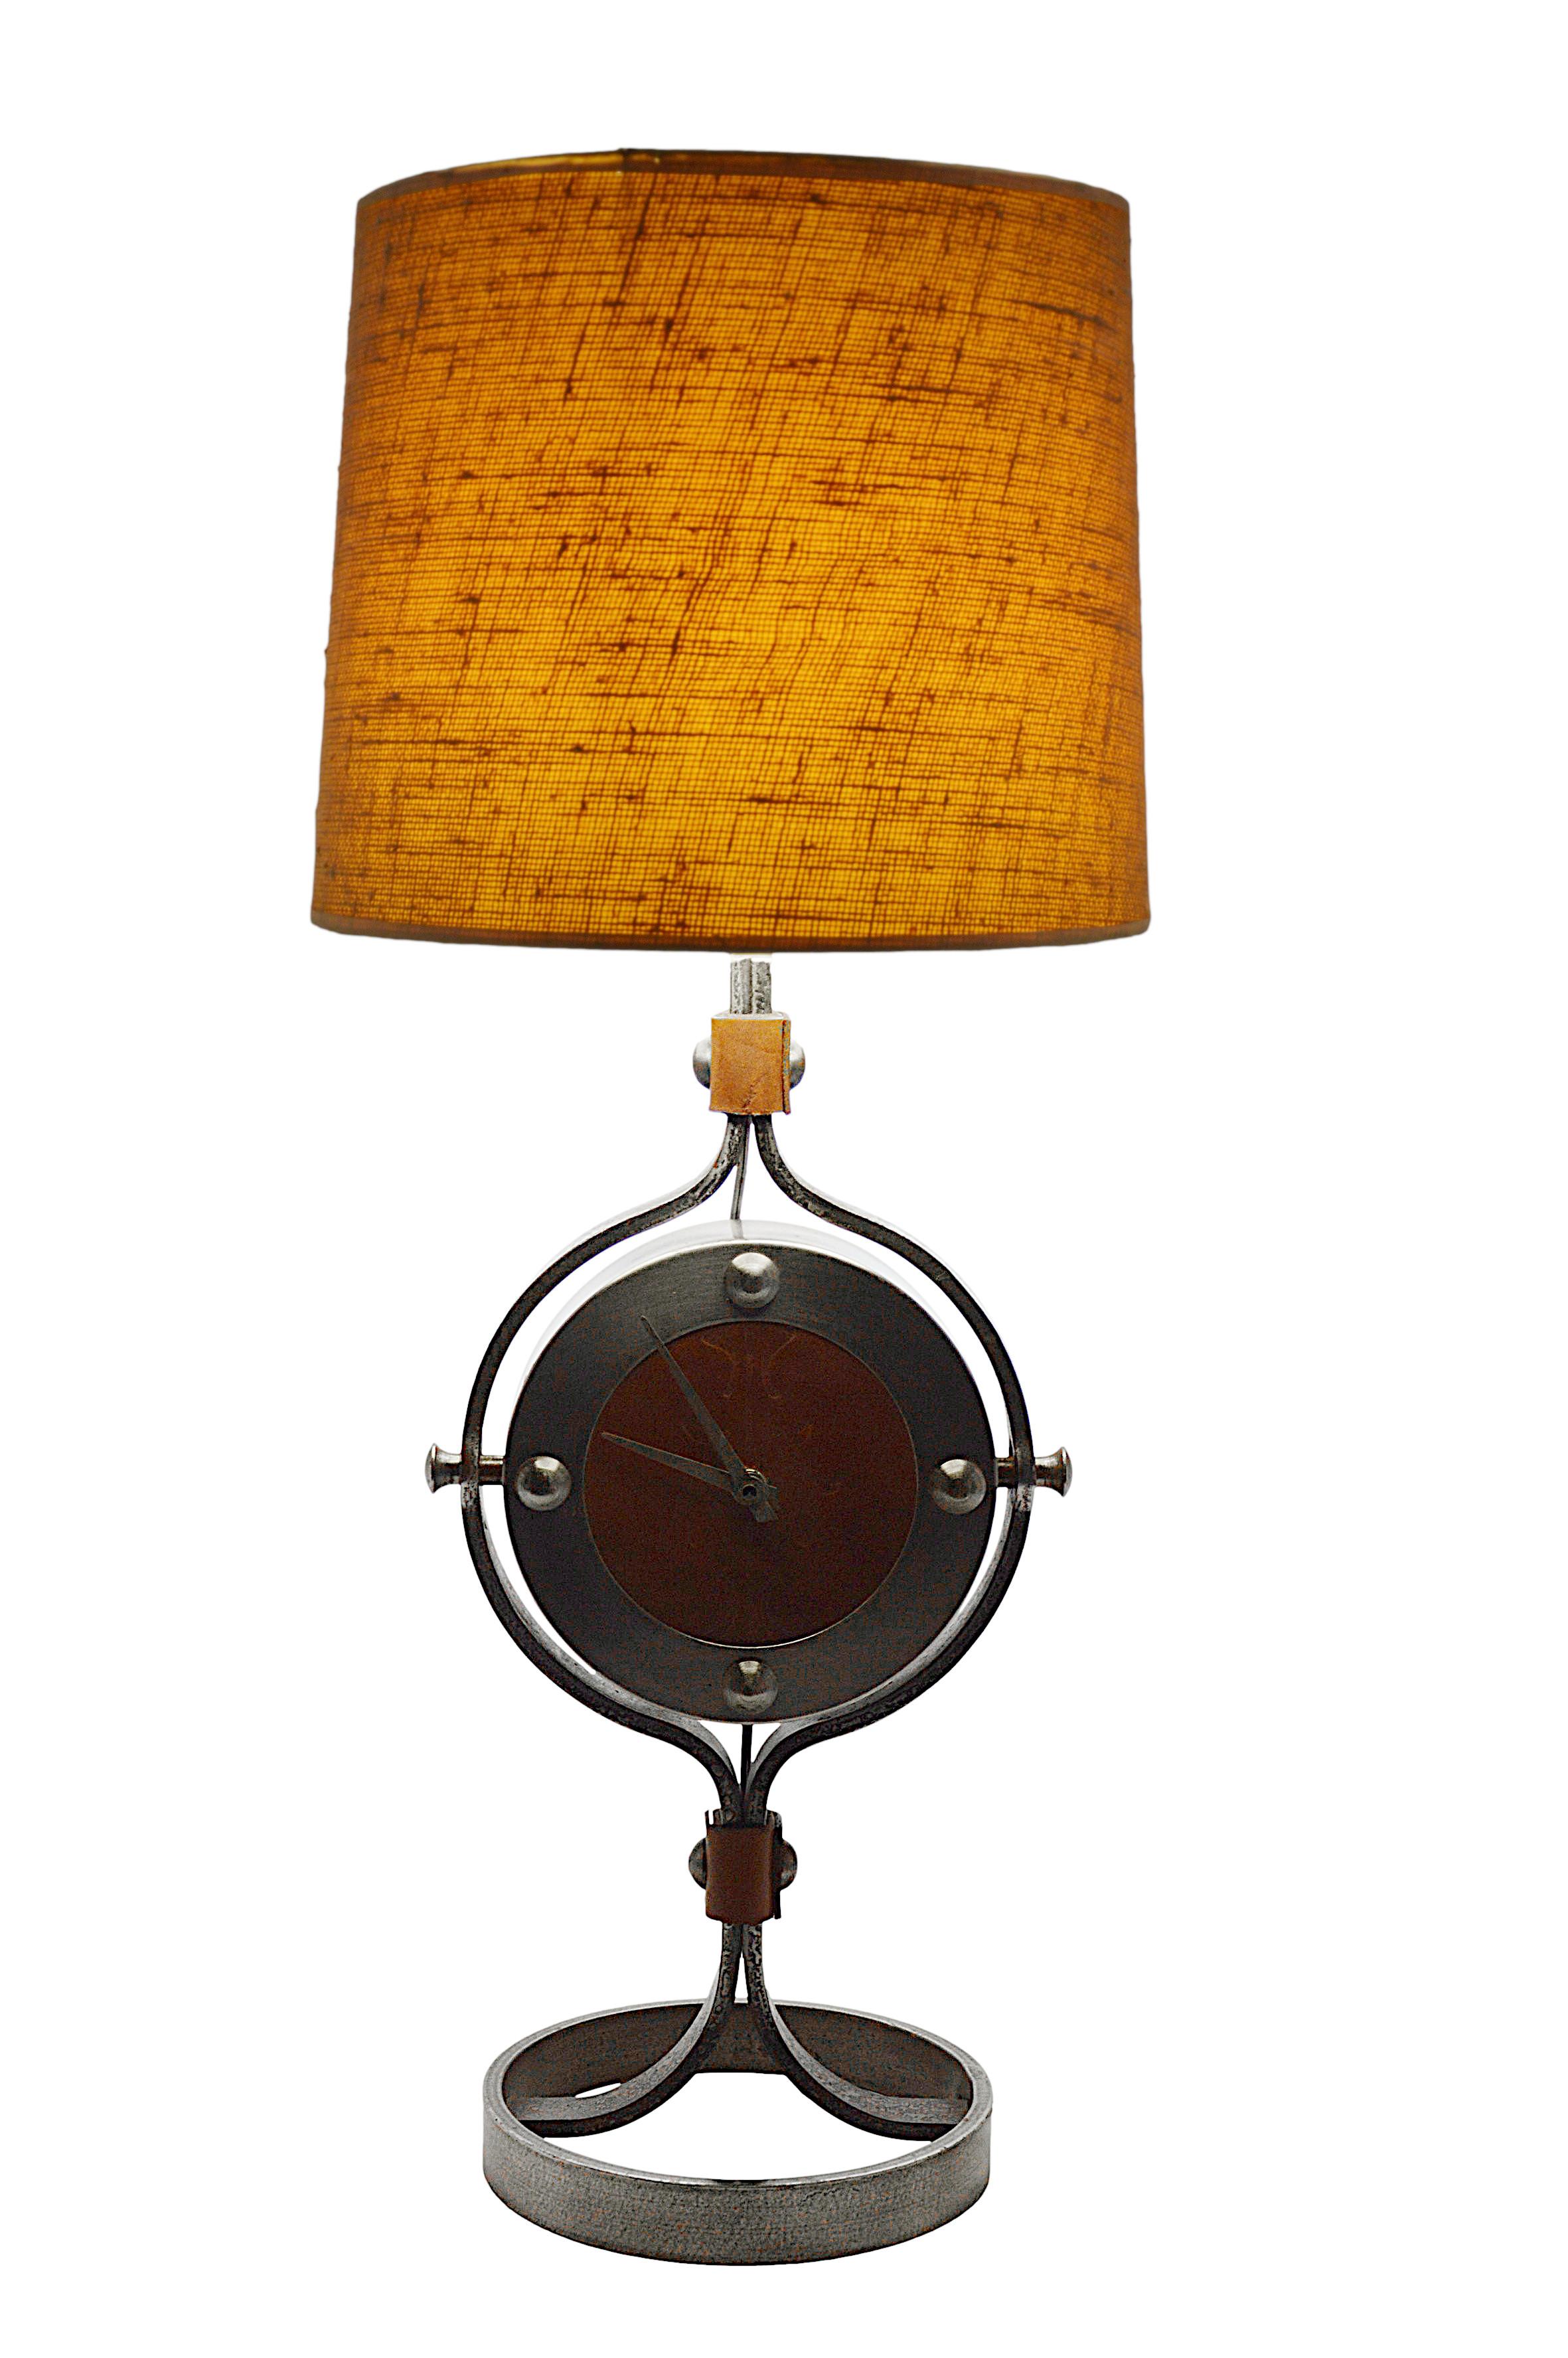 Large clock lamp by Jean-Pierre Ryckaert, Paris, circa 1950. Wrought-iron and leather. Decorated leather dial. Measurements without shade - height with socket : 21